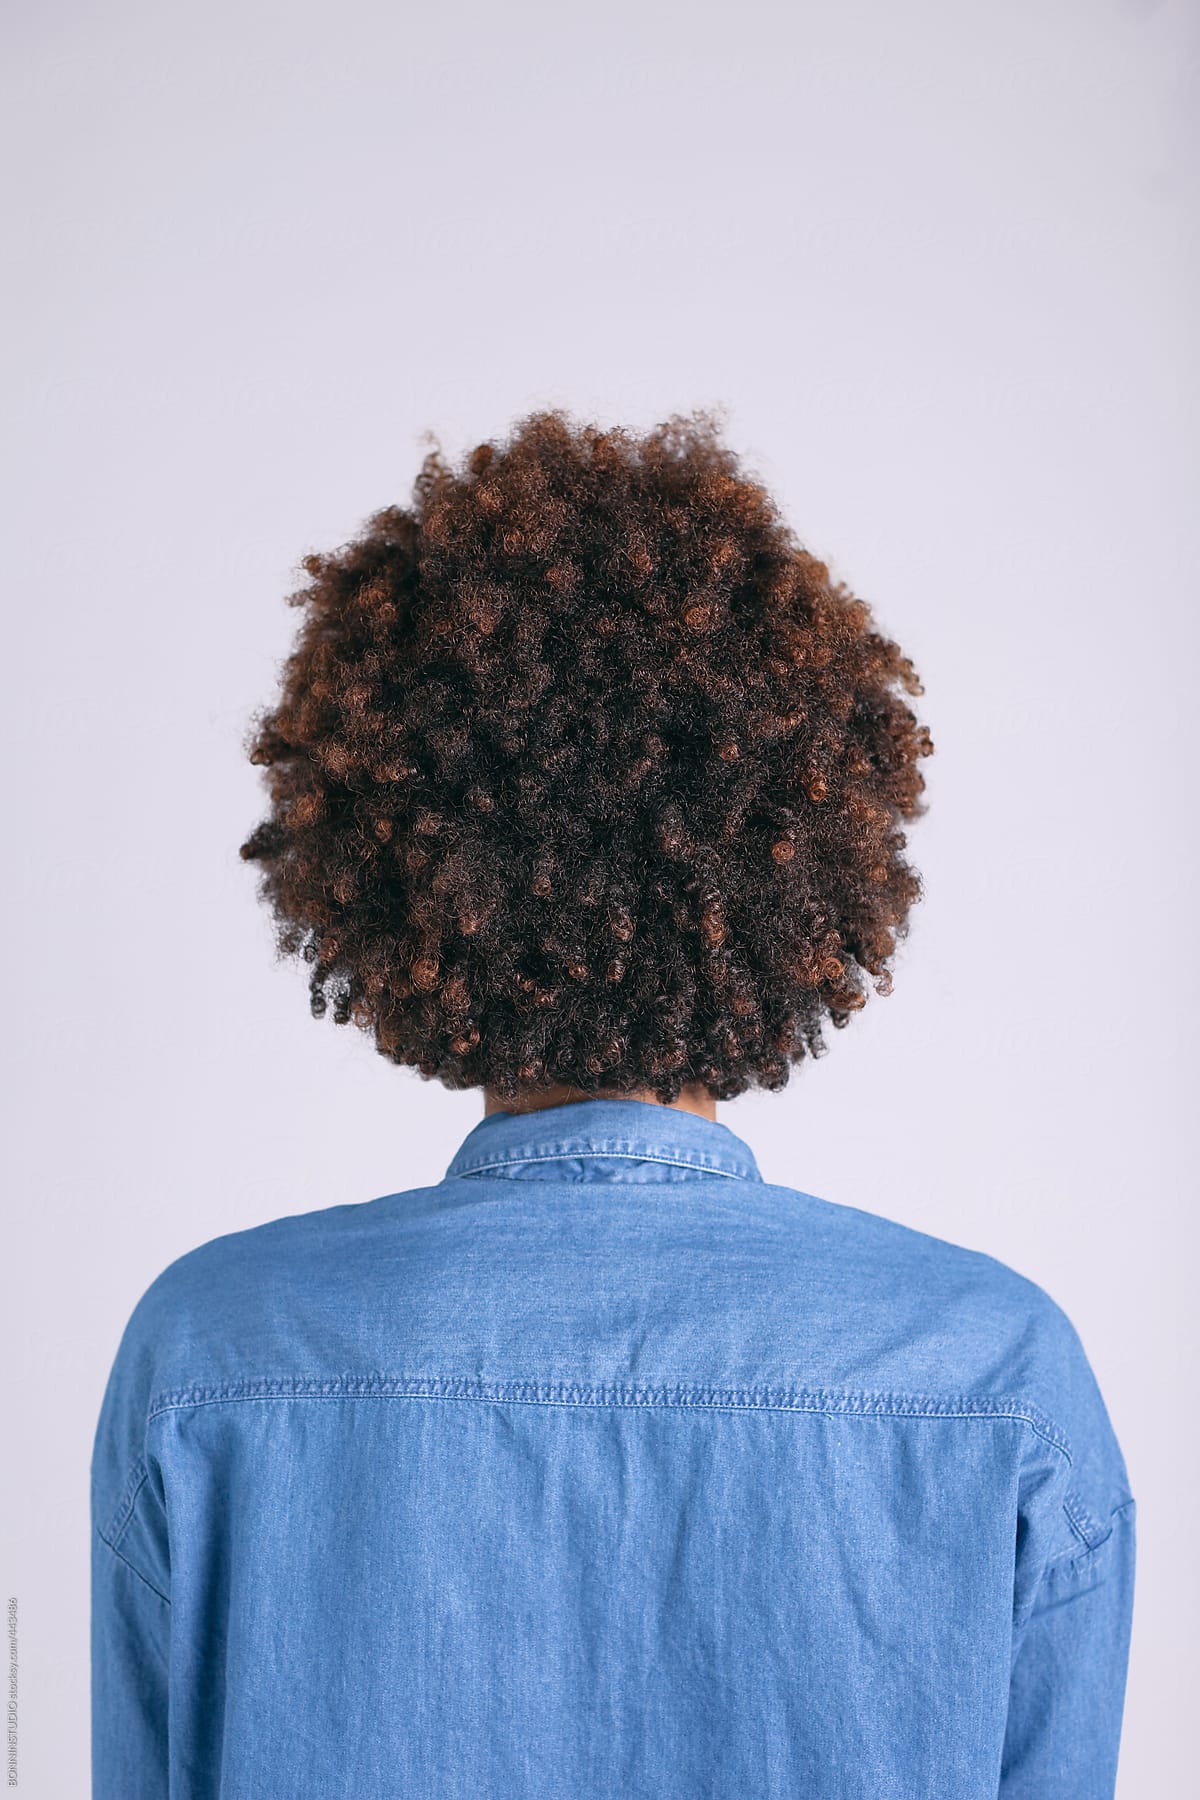 Back view of African American woman with brown curly hair.